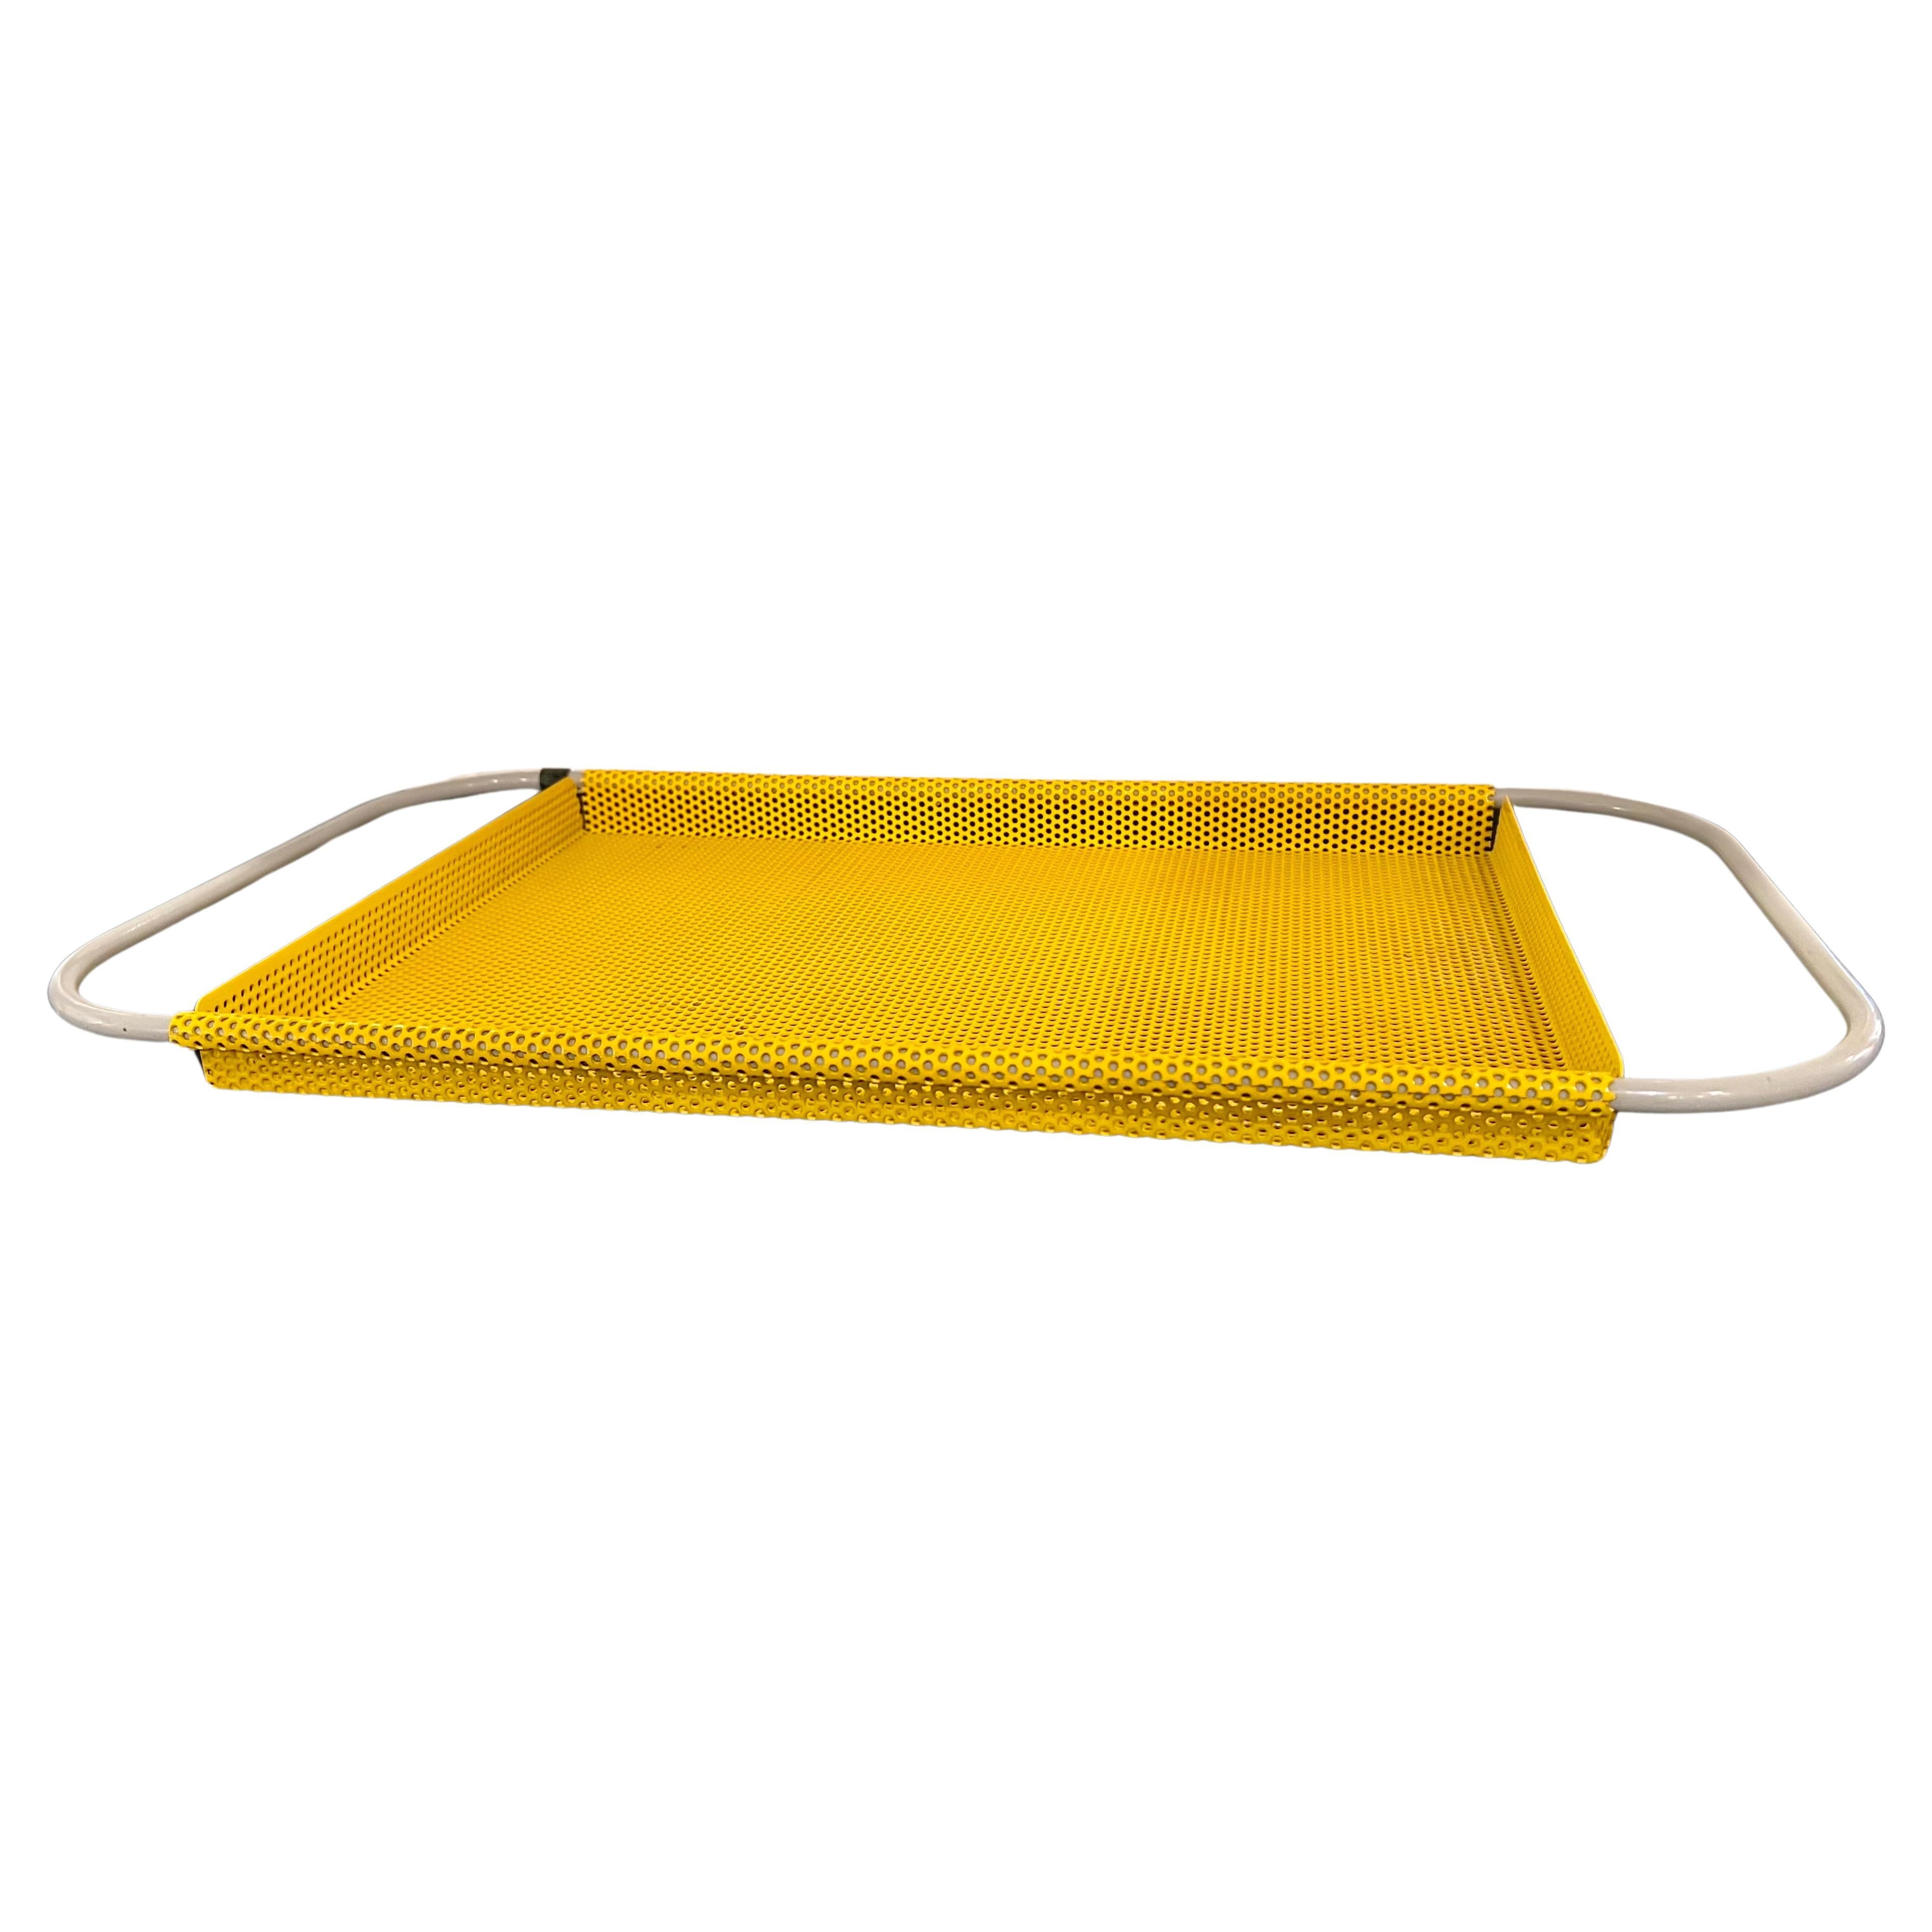 Late 20th Century Postmodern Italian 1980's Perforated Metal Tray For Sale